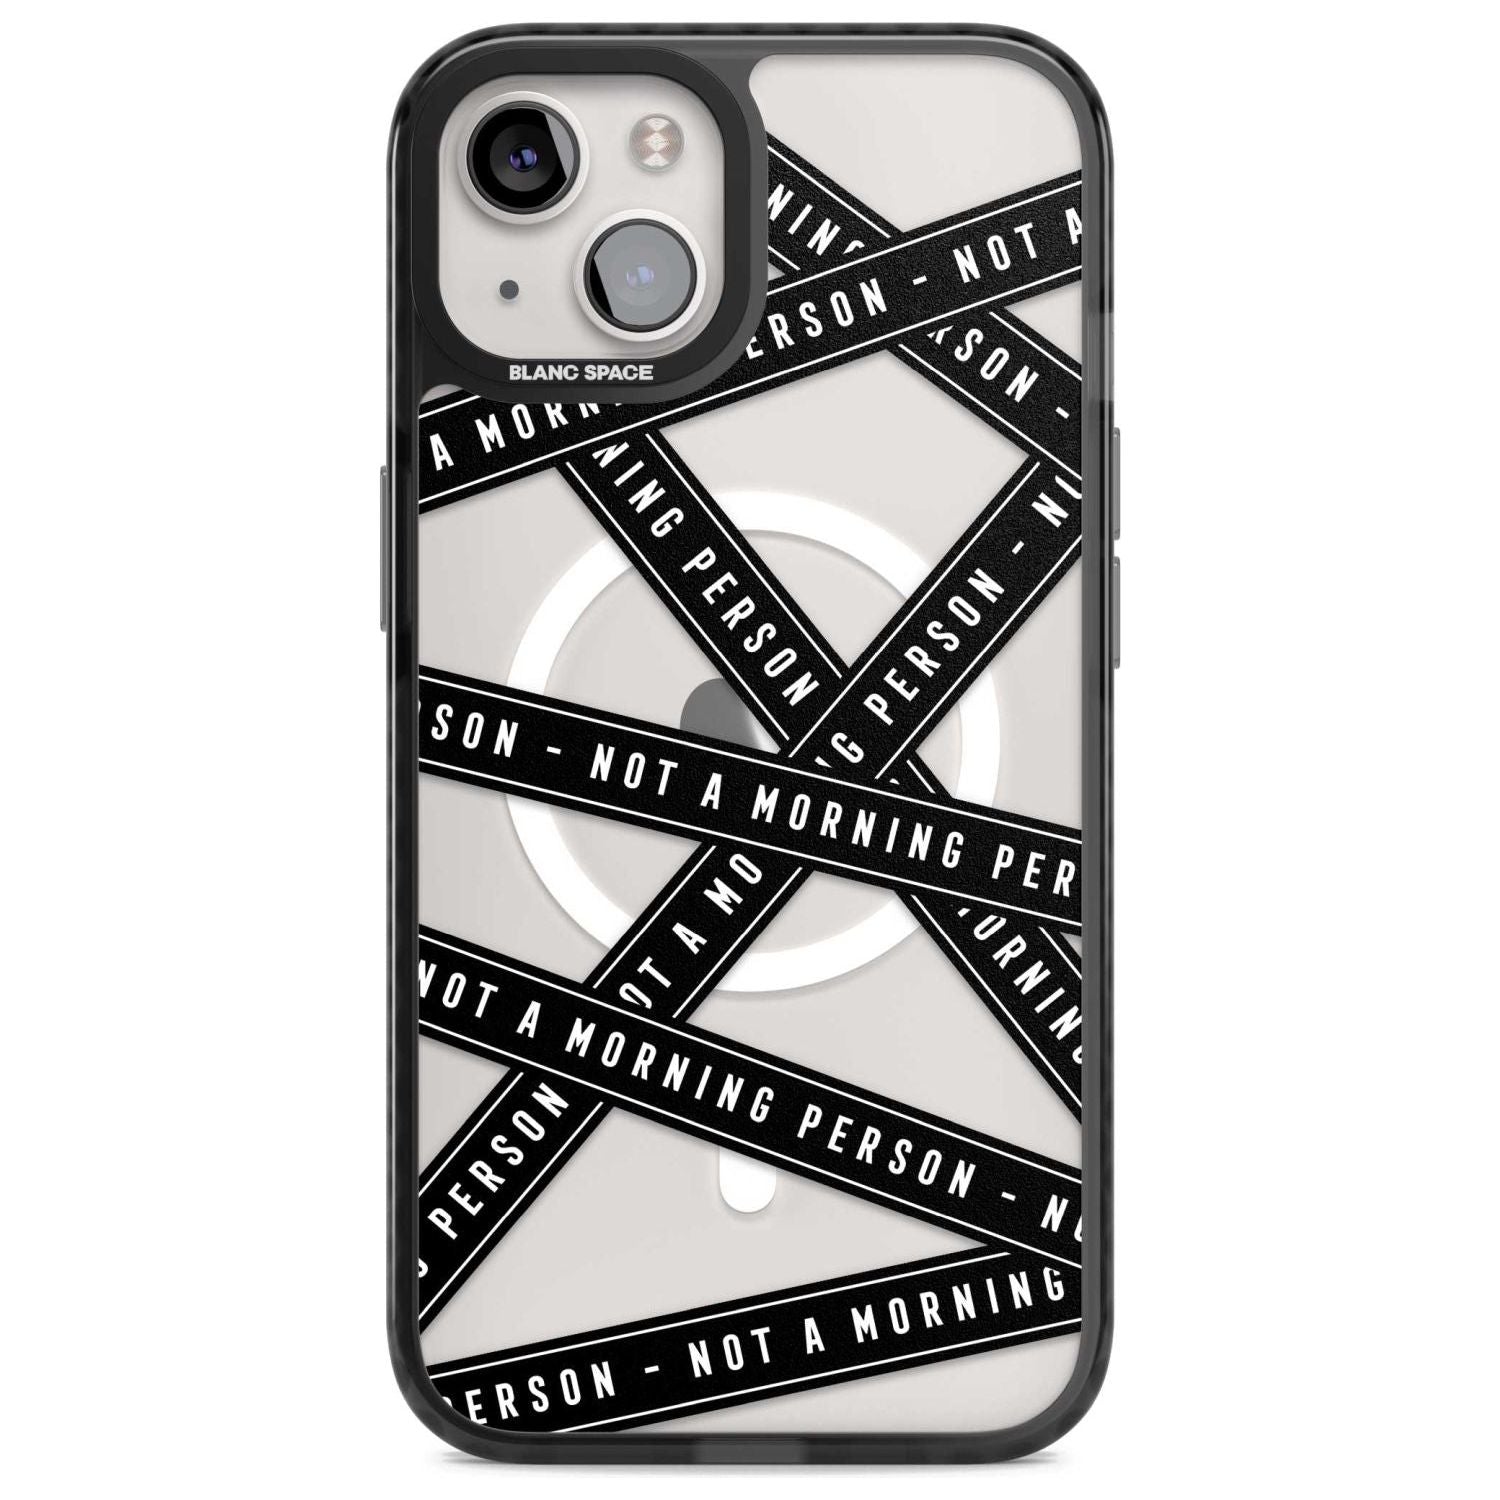 Caution Tape (Clear) Not a Morning Person Phone Case iPhone 15 Plus / Magsafe Black Impact Case,iPhone 15 / Magsafe Black Impact Case,iPhone 14 Plus / Magsafe Black Impact Case,iPhone 14 / Magsafe Black Impact Case,iPhone 13 / Magsafe Black Impact Case Blanc Space